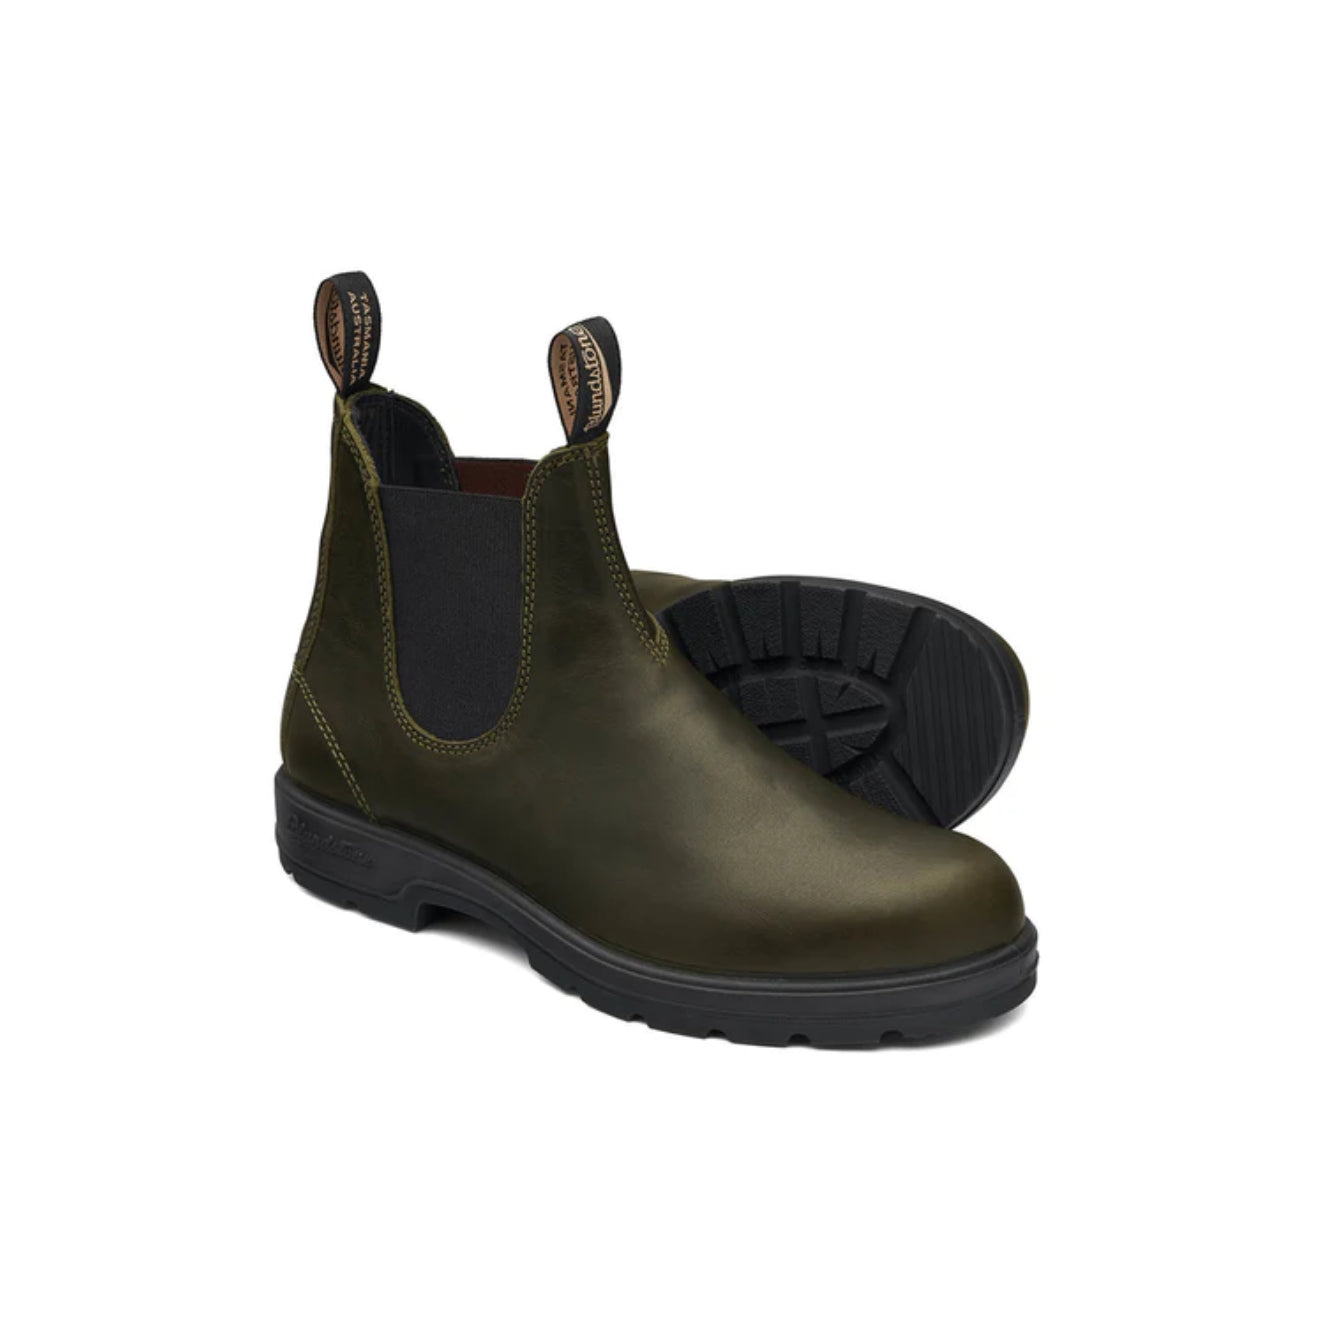 blundstone 2246 Dark green chelsea side view with sole